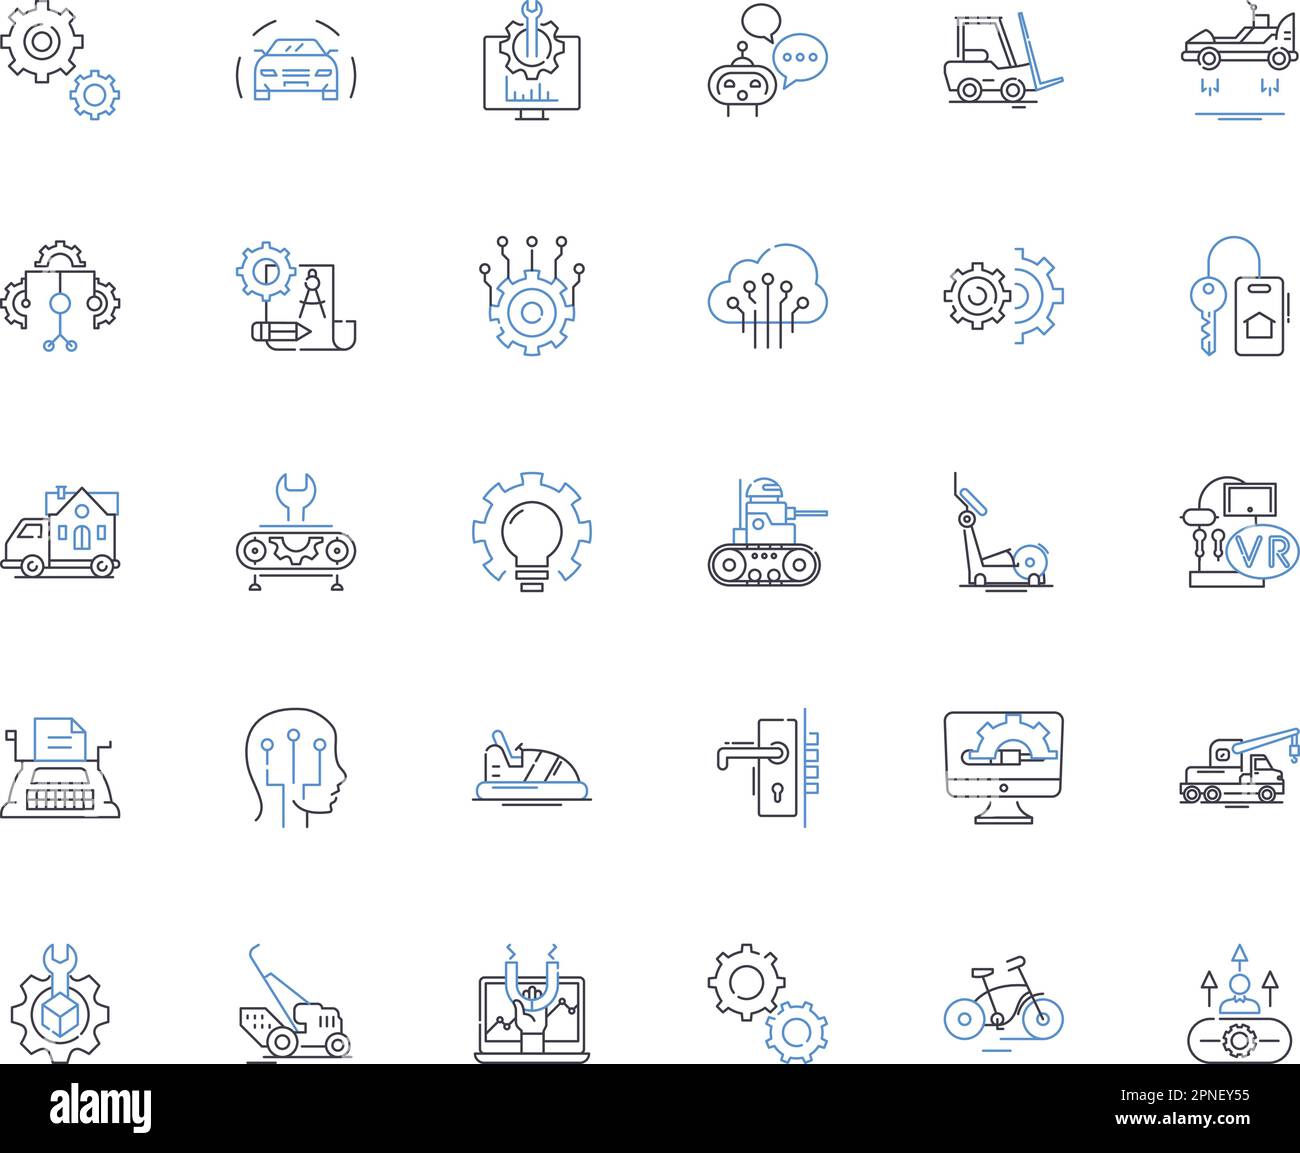 Movement line icons collection. Motion, Mobility, Action, Gestures, Locomotion, Rhythm, Flow vector and linear illustration. Lilt,Traction,Momentum Stock Vector